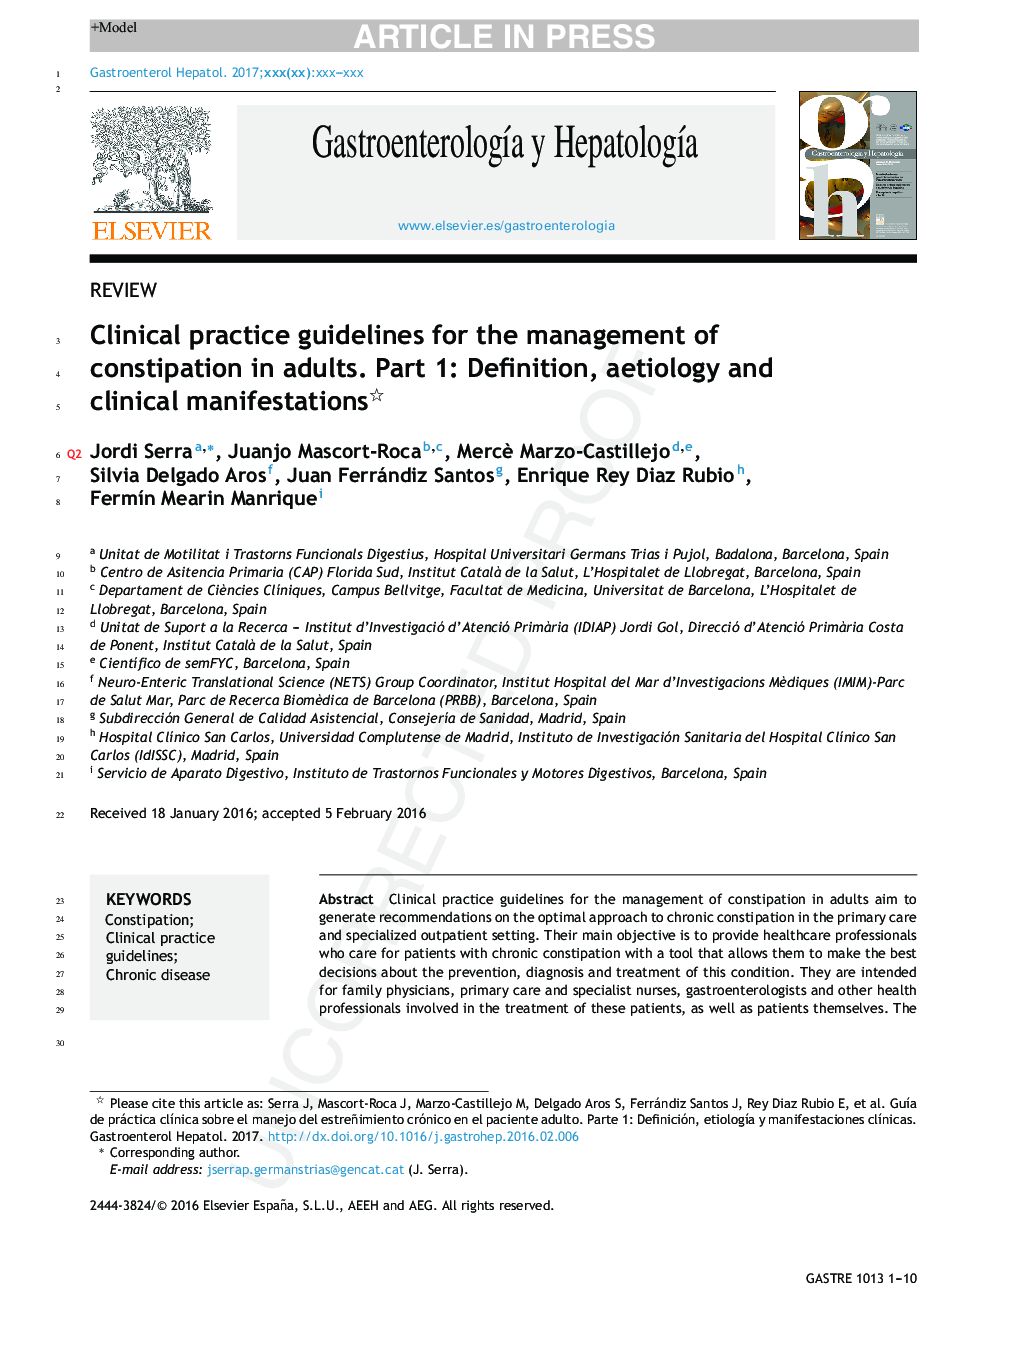 Clinical practice guidelines for the management of constipation in adults. Part 1: Definition, aetiology and clinical manifestations